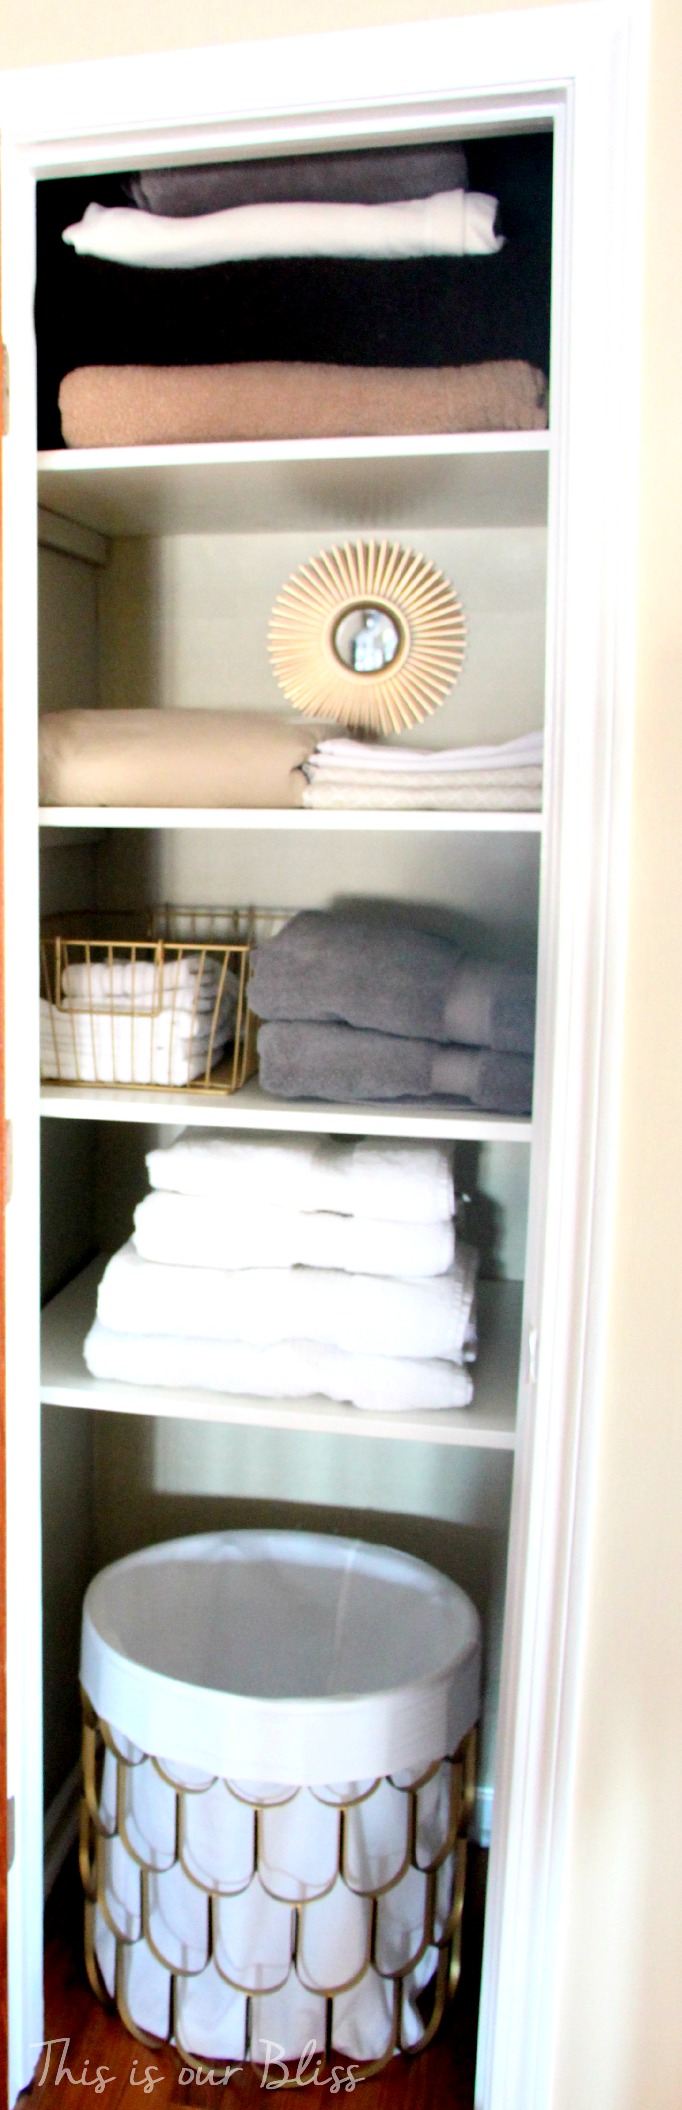 small space storage solutions - simplify linen closet - This is our Bliss